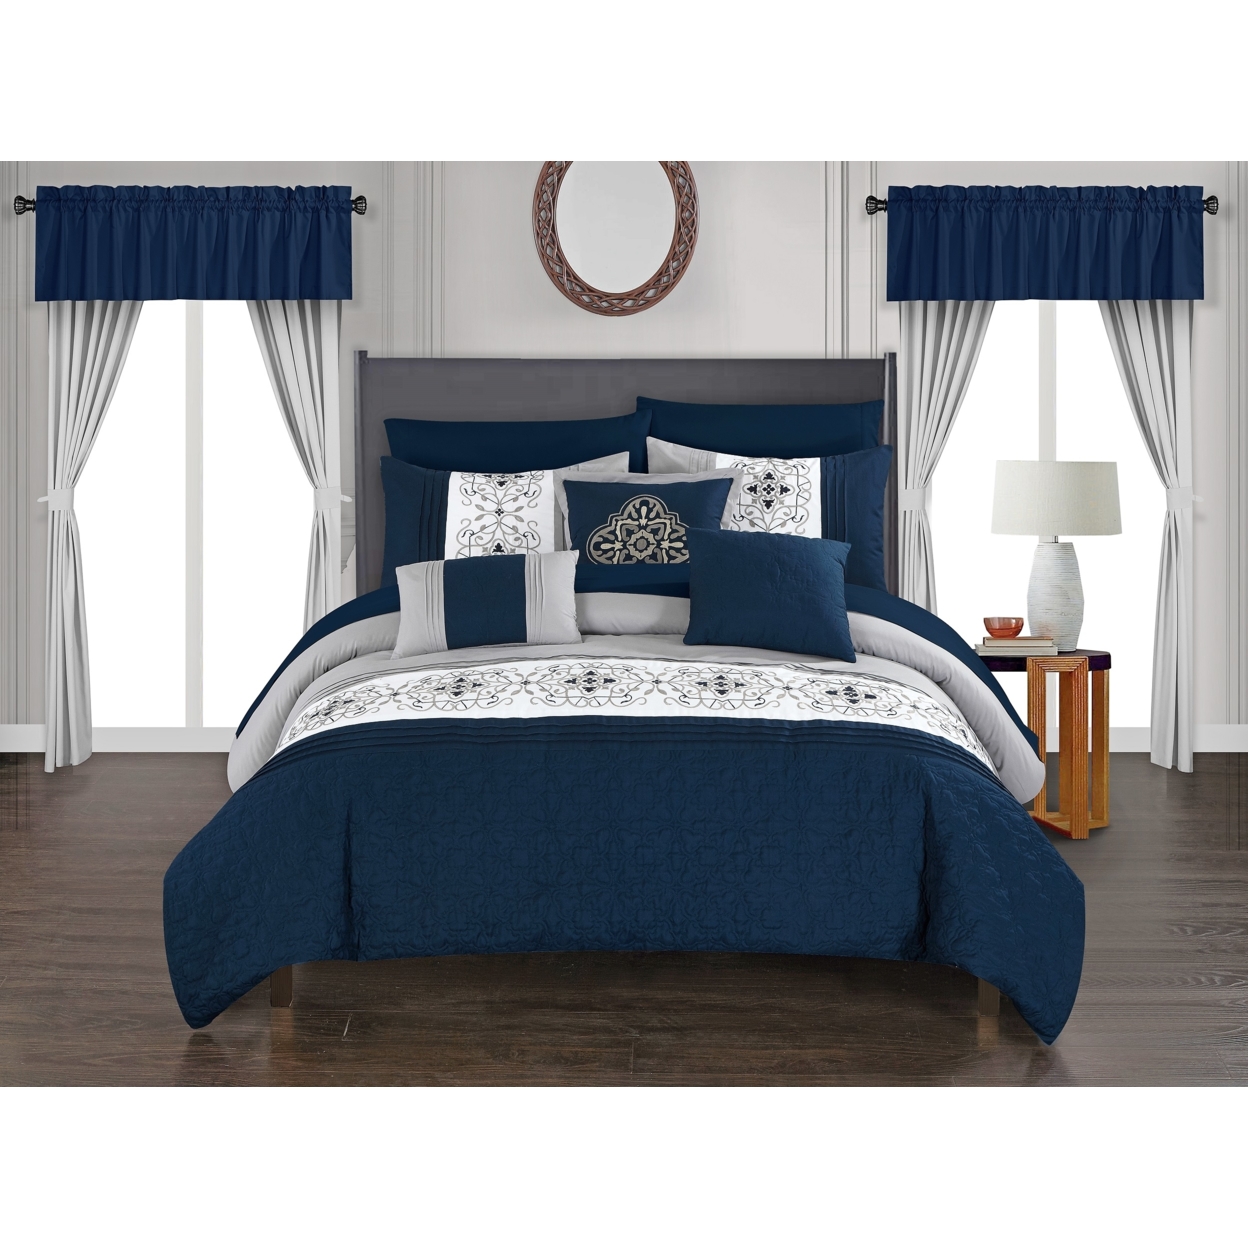 Jurgen 20-Piece Floral Embroidered Bed In A Bag Bedding And Comforter Set - Navy, King